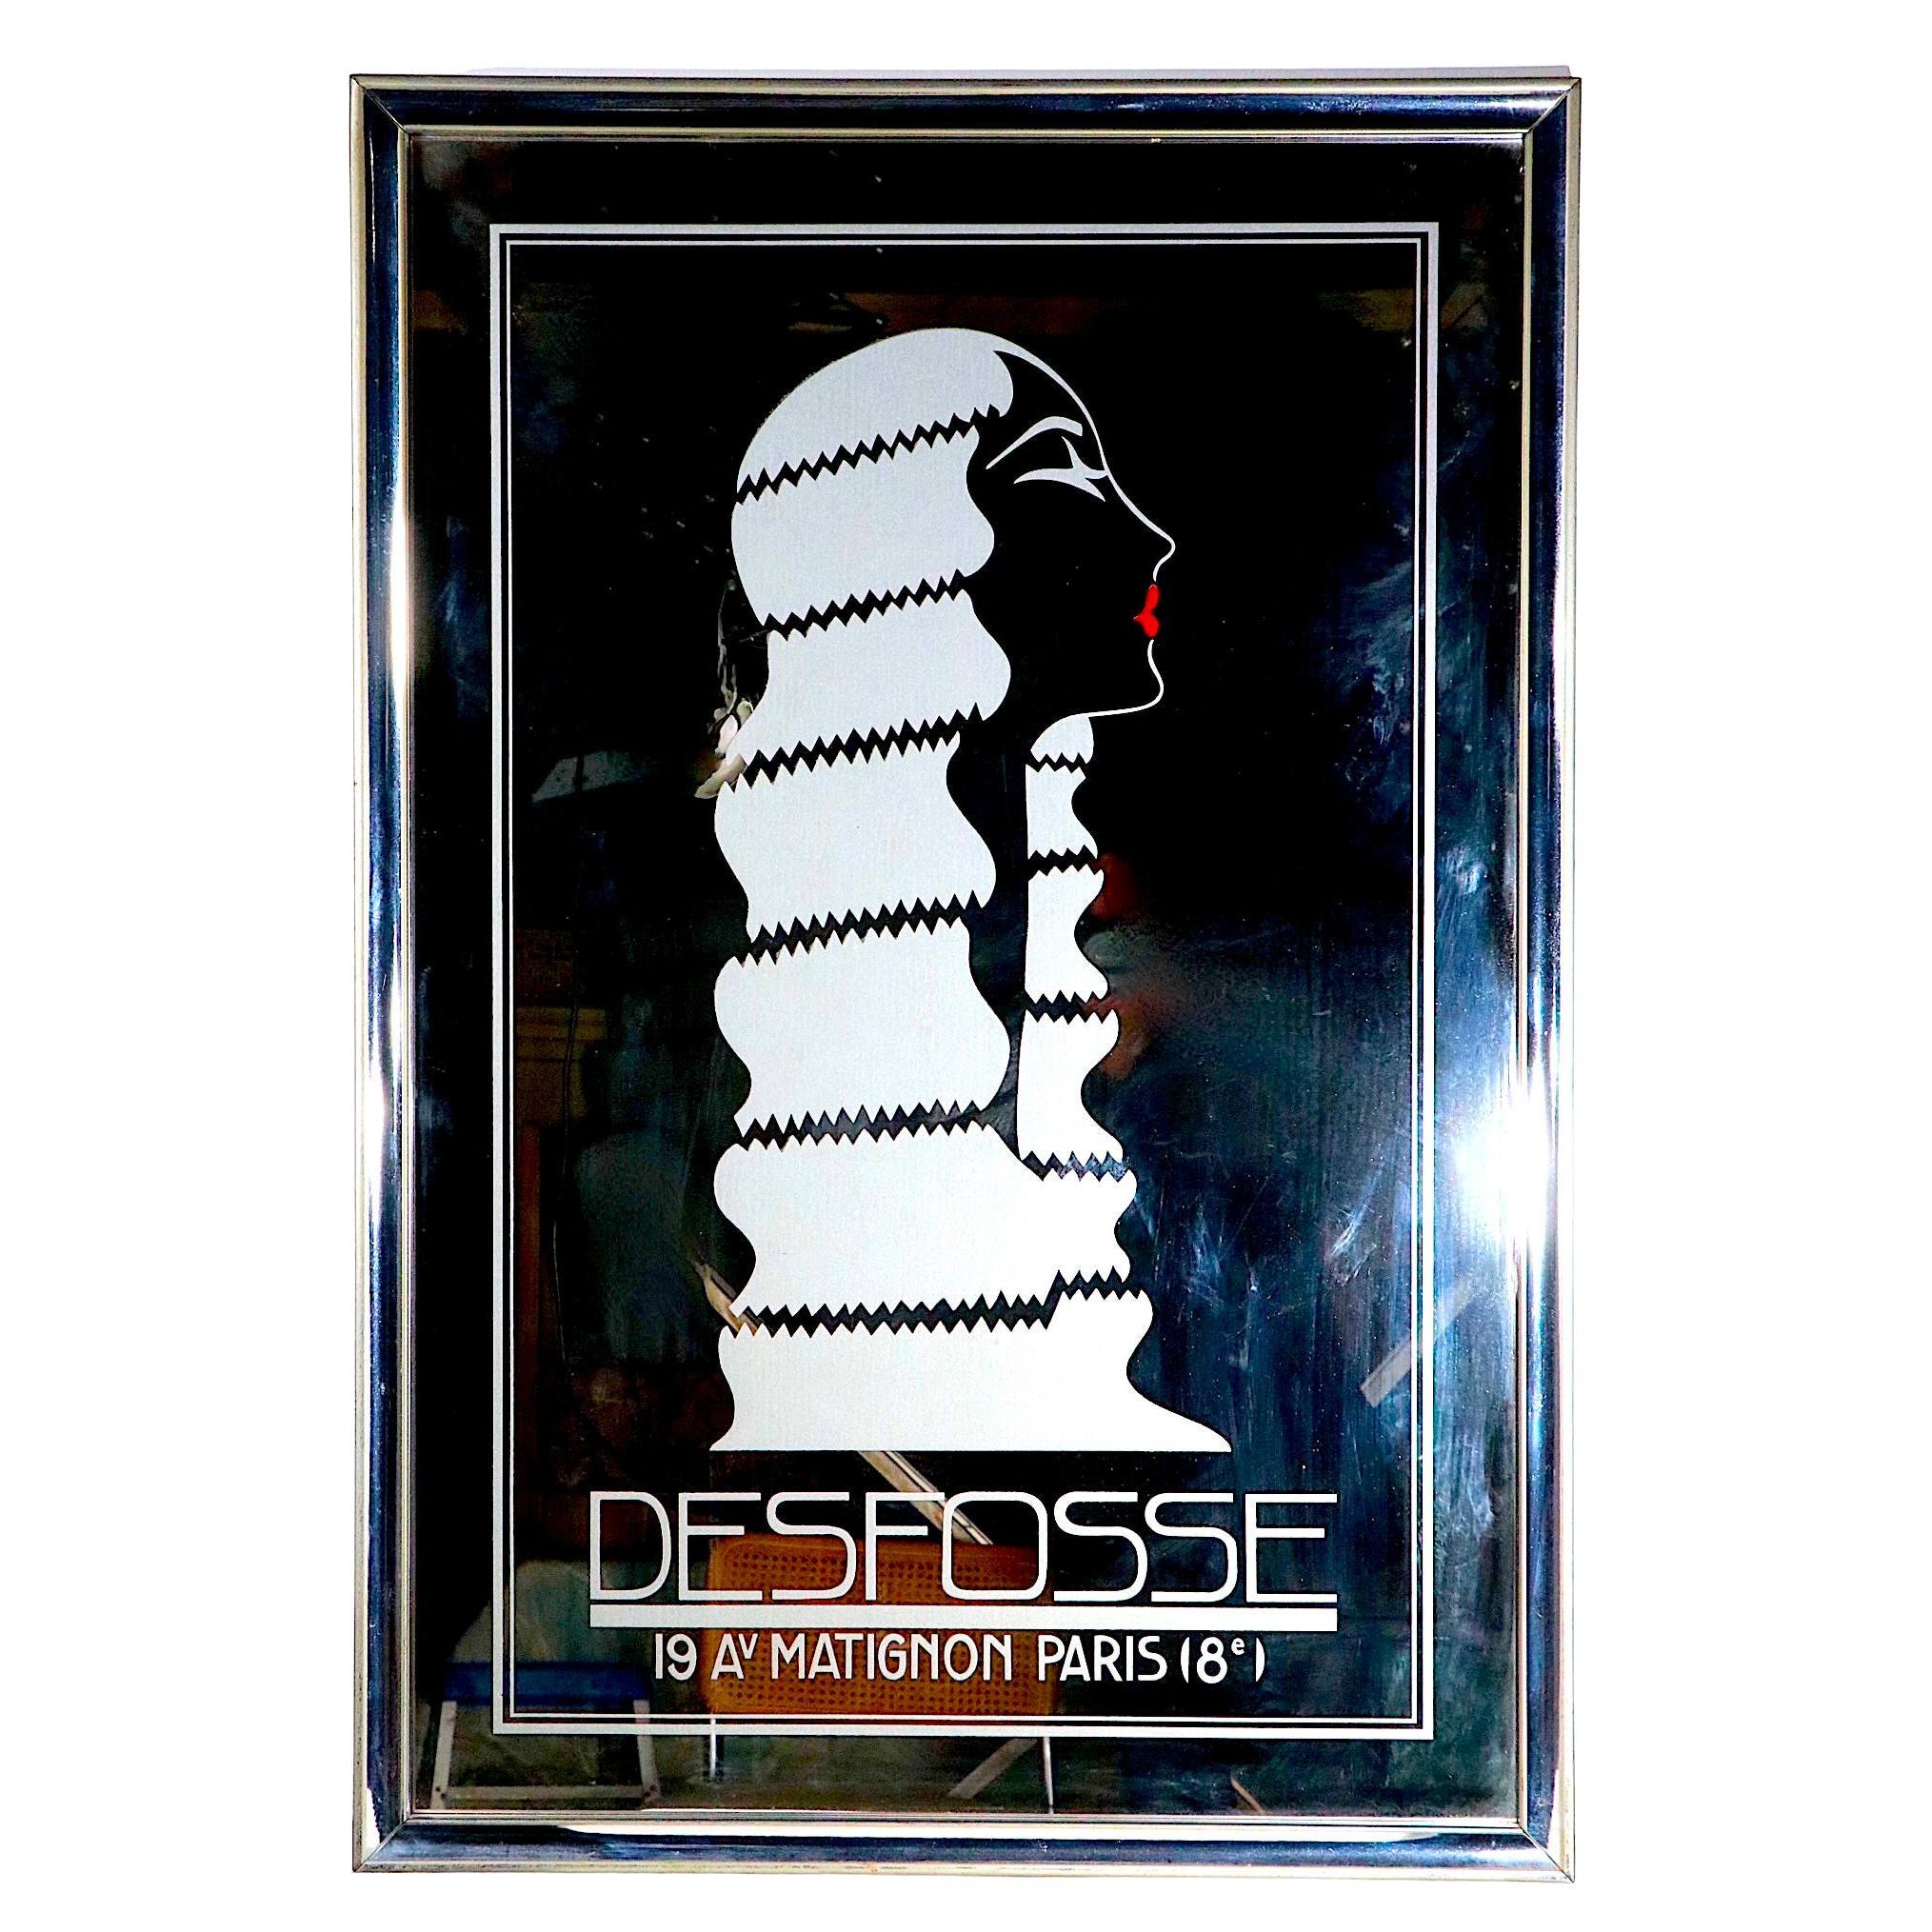 Hard to find decorated mirror with a stylish 1920's style woman in profile, advertising the world famous Desfosse Hair Salon in Paris, France. This example is in very good, original condition, clean and ready to display, showing only light cosmetic